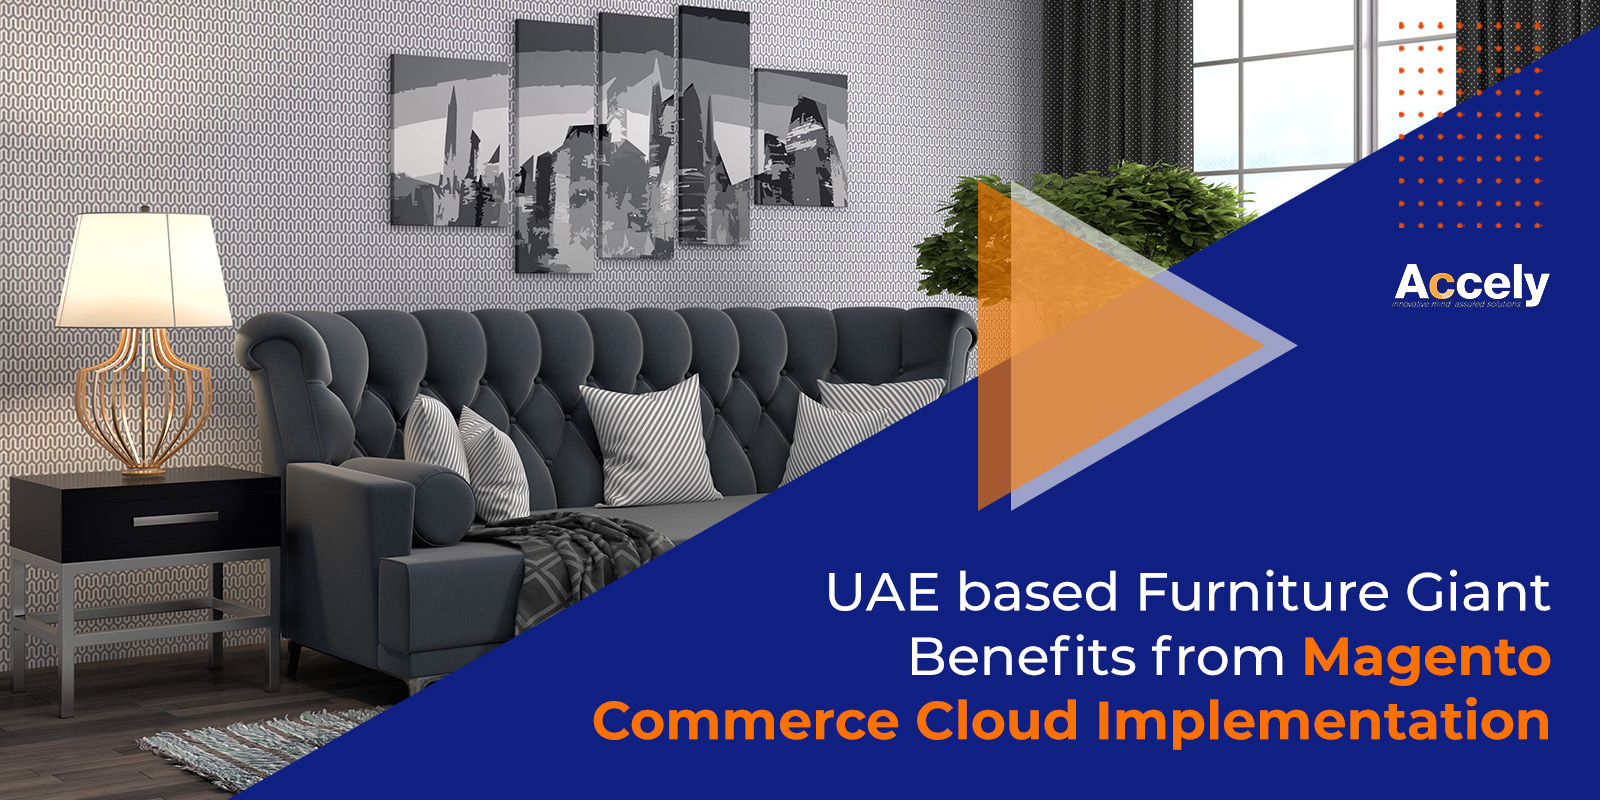 UAE based Furniture Giant Benefits from Magento Commerce Cloud Implementation